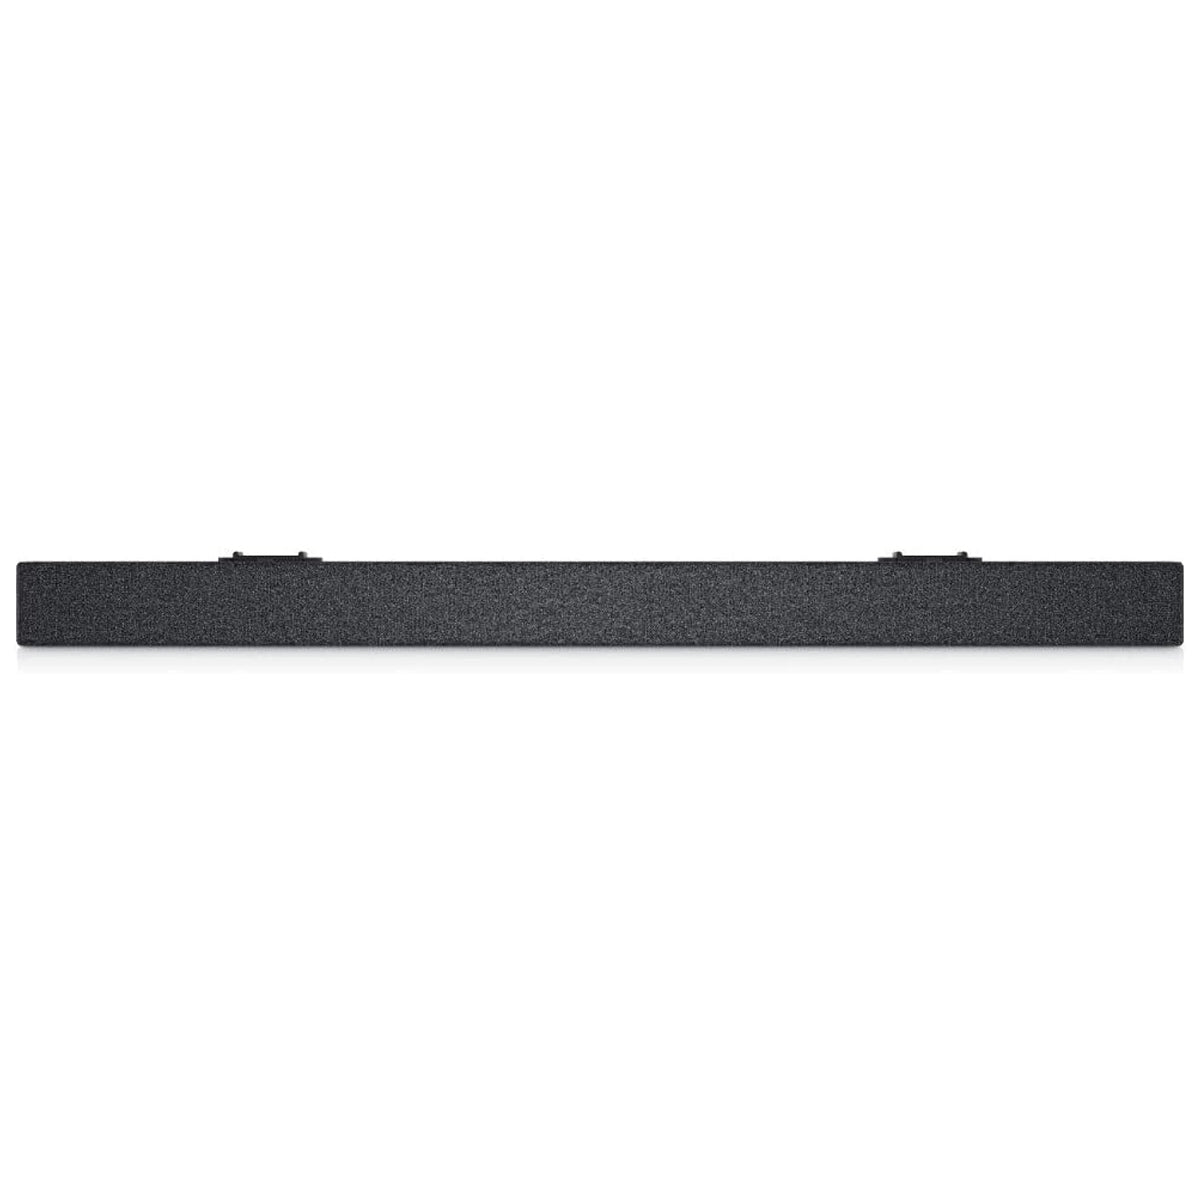 [RePacked] Dell SB521A Slim USB Powered Soundbar with Magnetic Mounting